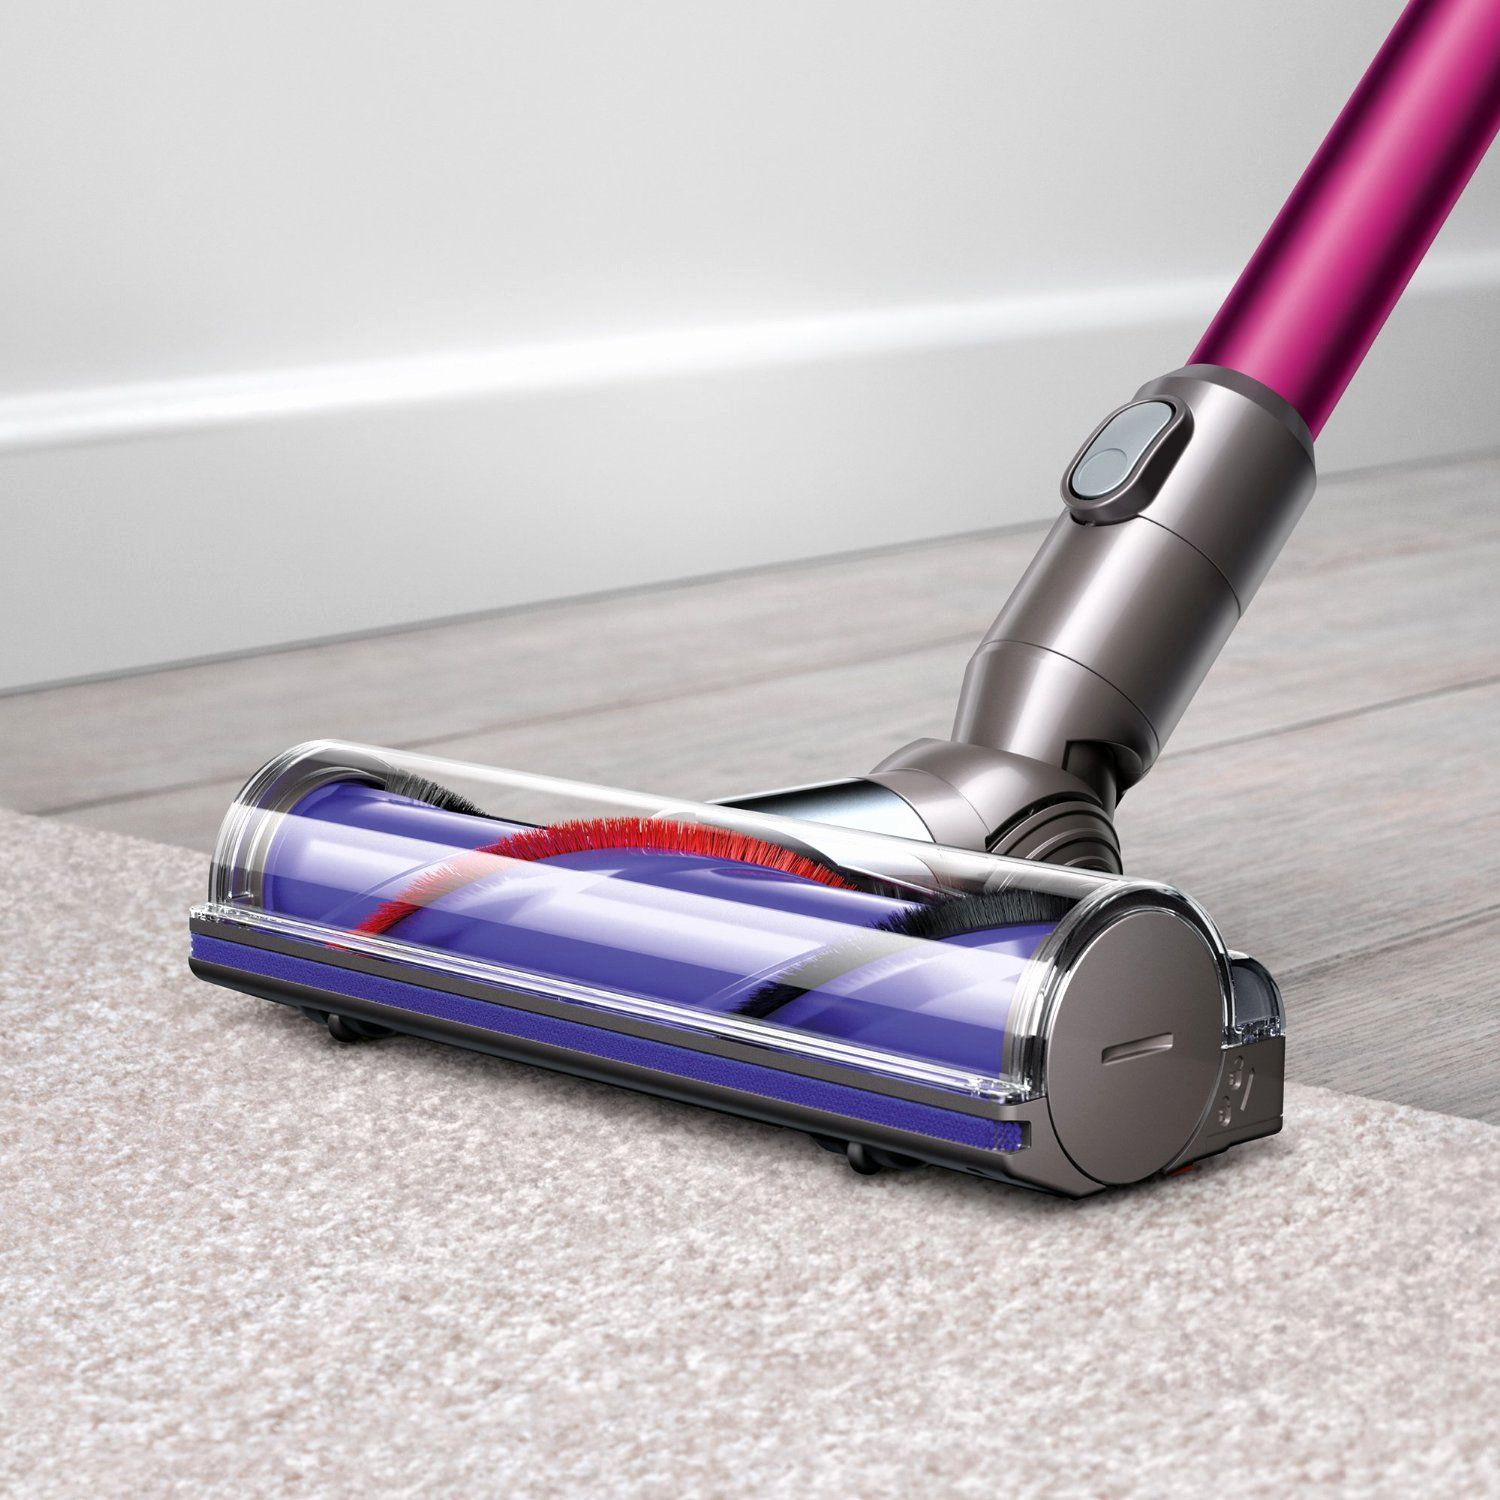 30 Trendy Best Vacuum for Pet Hair and Hardwood Floors 2015 2024 free download best vacuum for pet hair and hardwood floors 2015 of best vacuum insulated bottles archives wlcu pertaining to best vacuum for hard floors and pet hair elegant 15 most useful gad s for clean